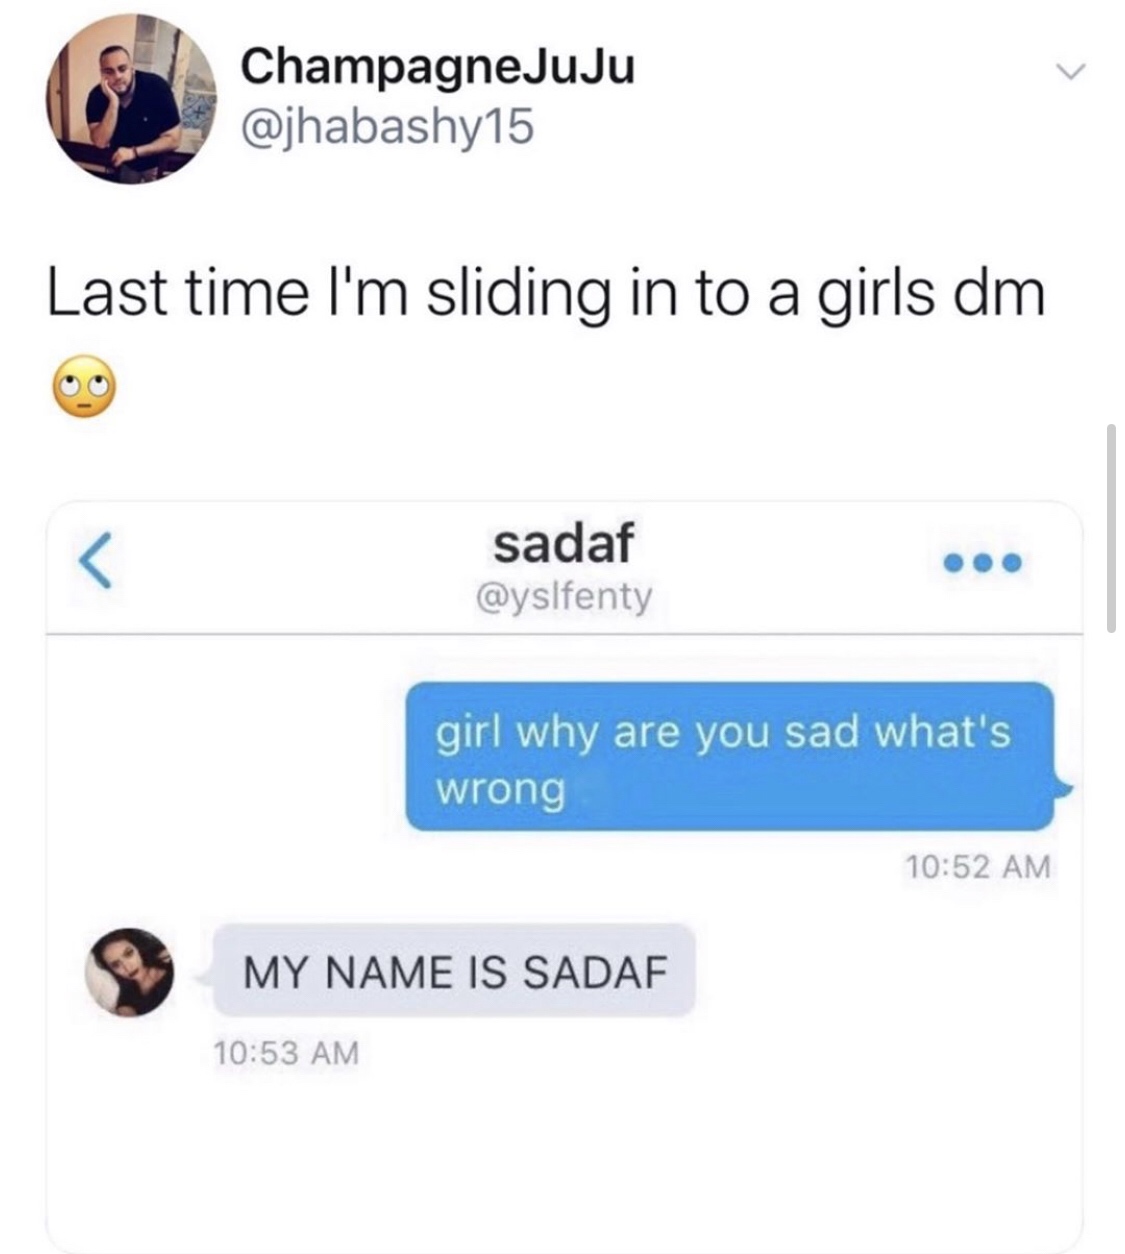 web page - Champagne Juju Last time I'm sliding in to a girls dm sadaf girl why are you sad what's wrong My Name Is Sadaf